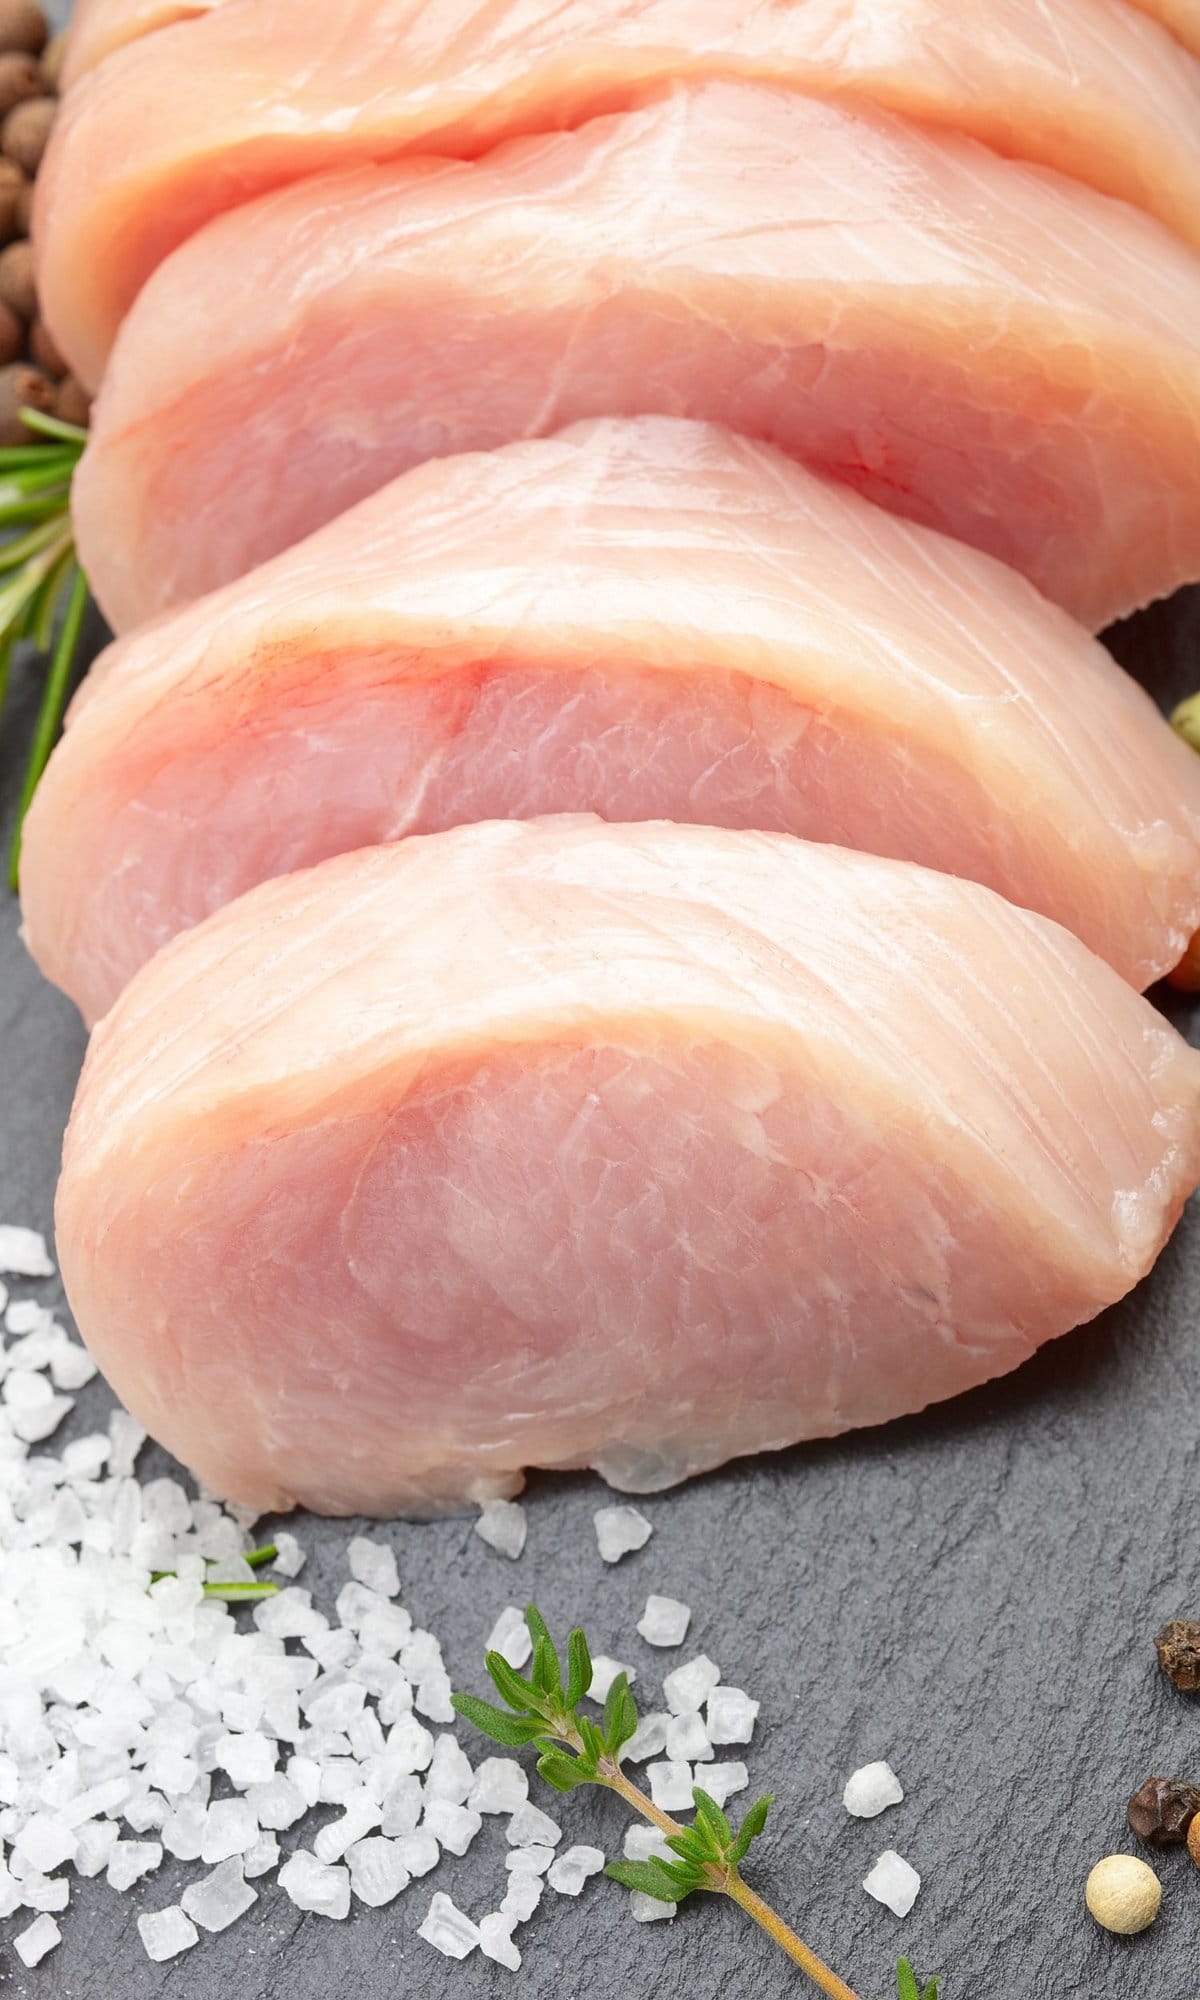 raw sliced chicken on a gray surface next to crystalized salt